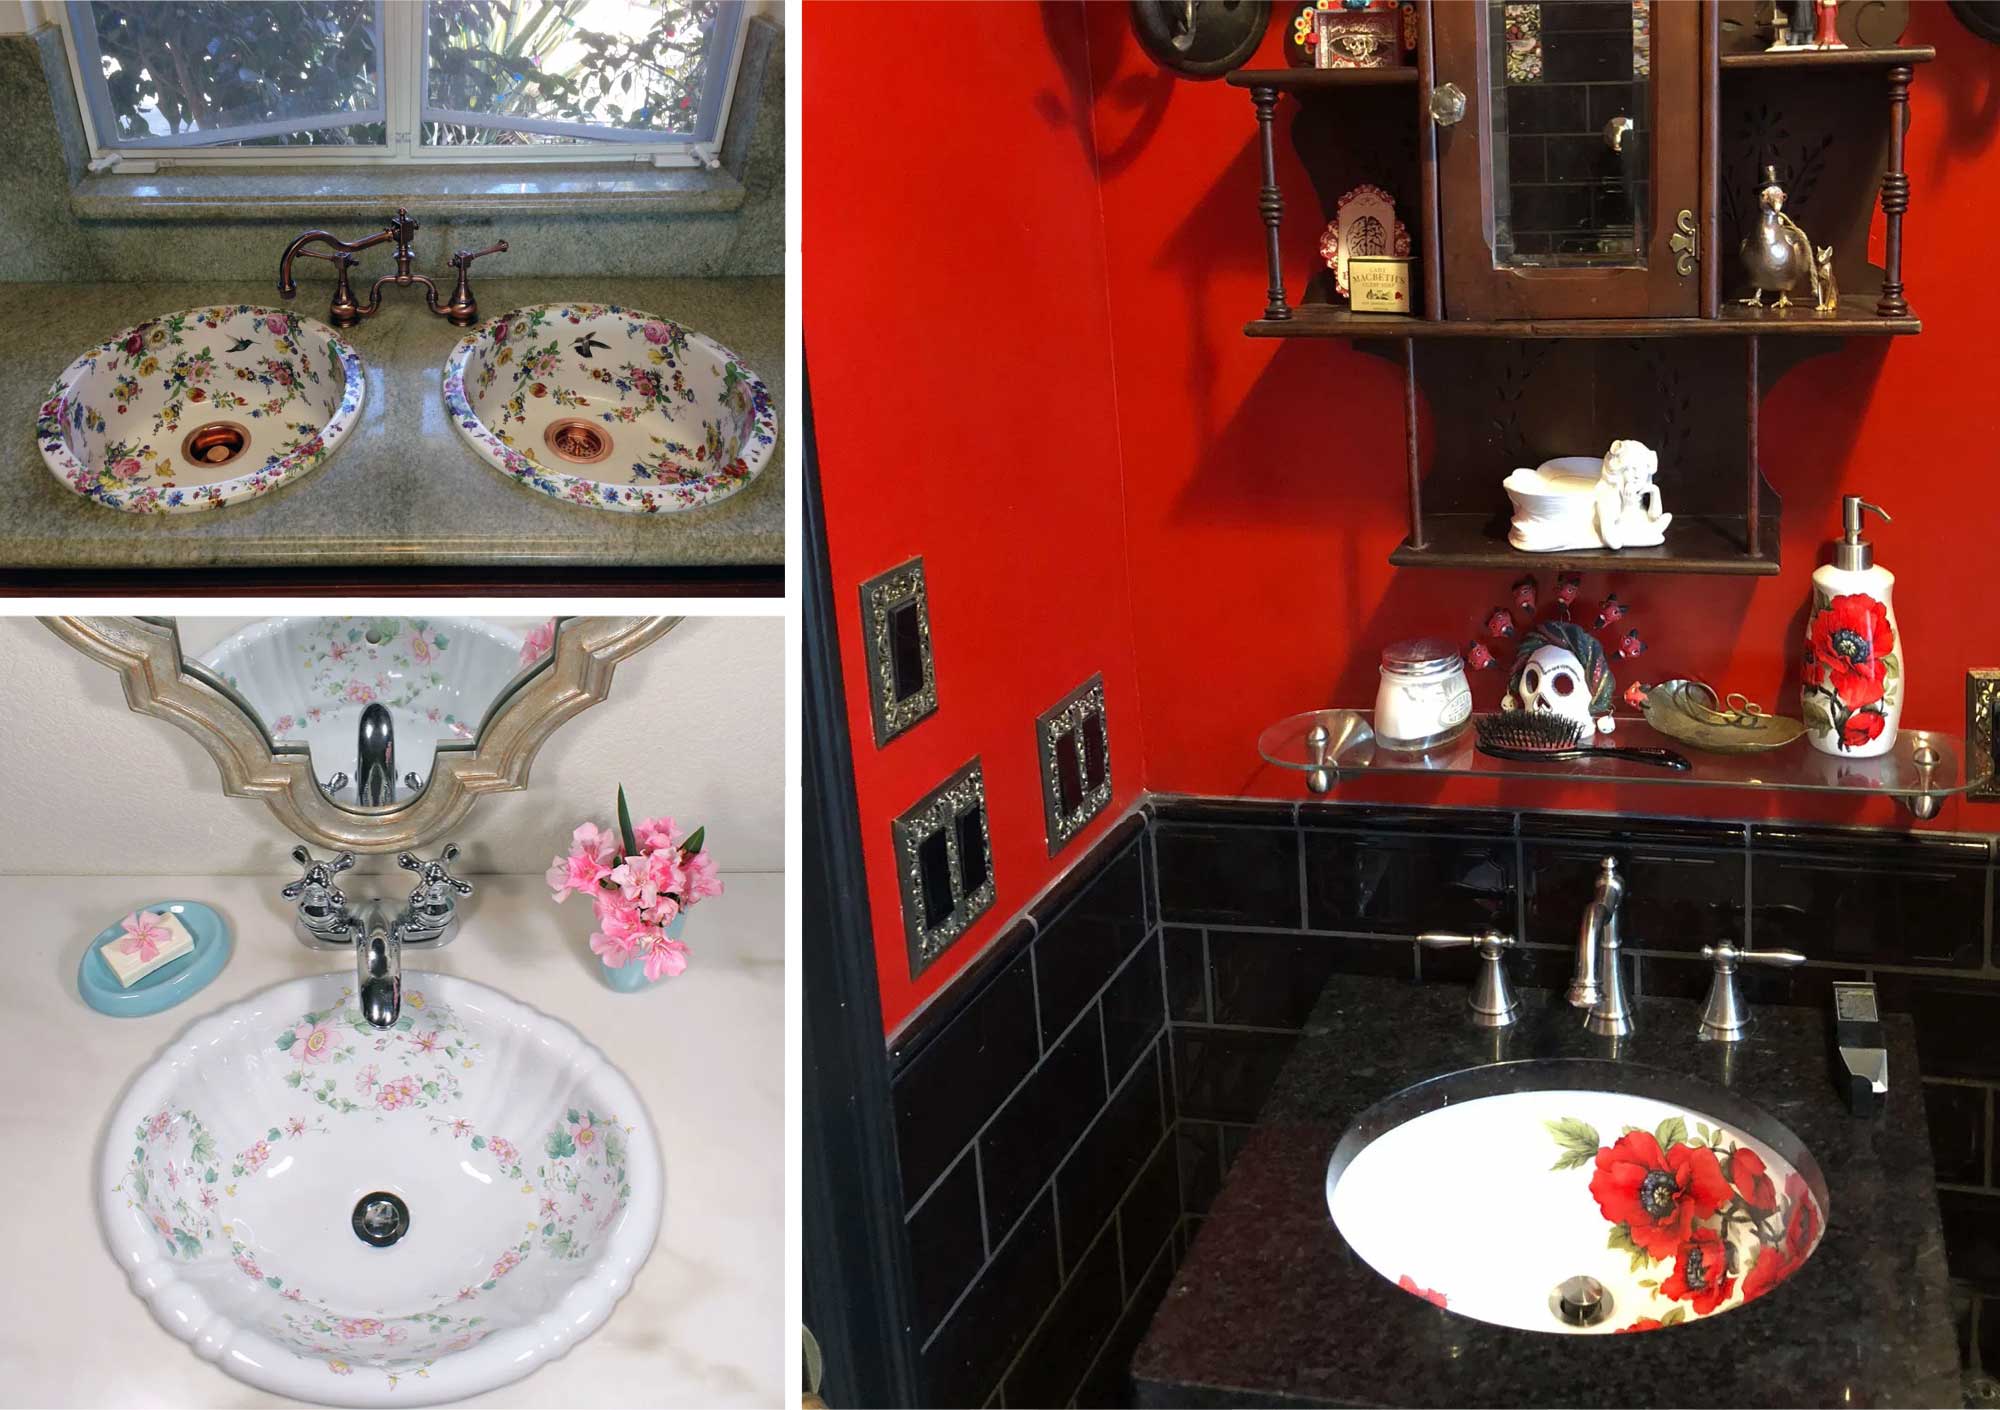 unique custom bathroom design ideas with painted sinks. Roses bathroom, bar sinks with flowers and hand painted red poppy sink in goth bathroom.